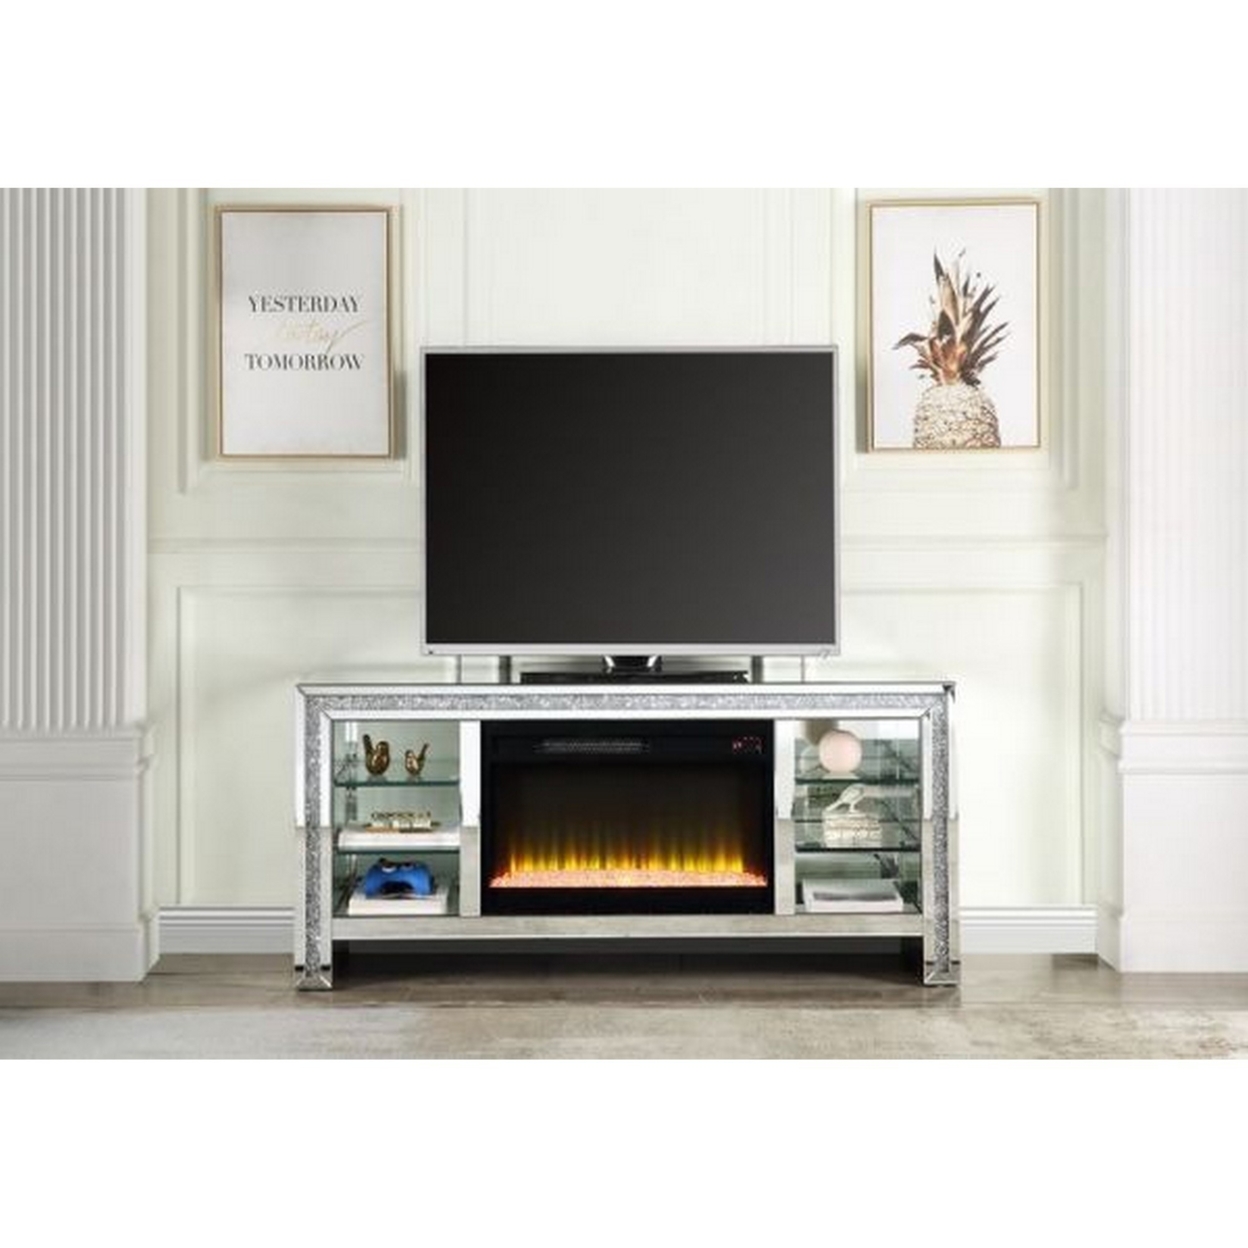 TV Stand With Fireplace And Three Shelves, Silver And Black- Saltoro Sherpi